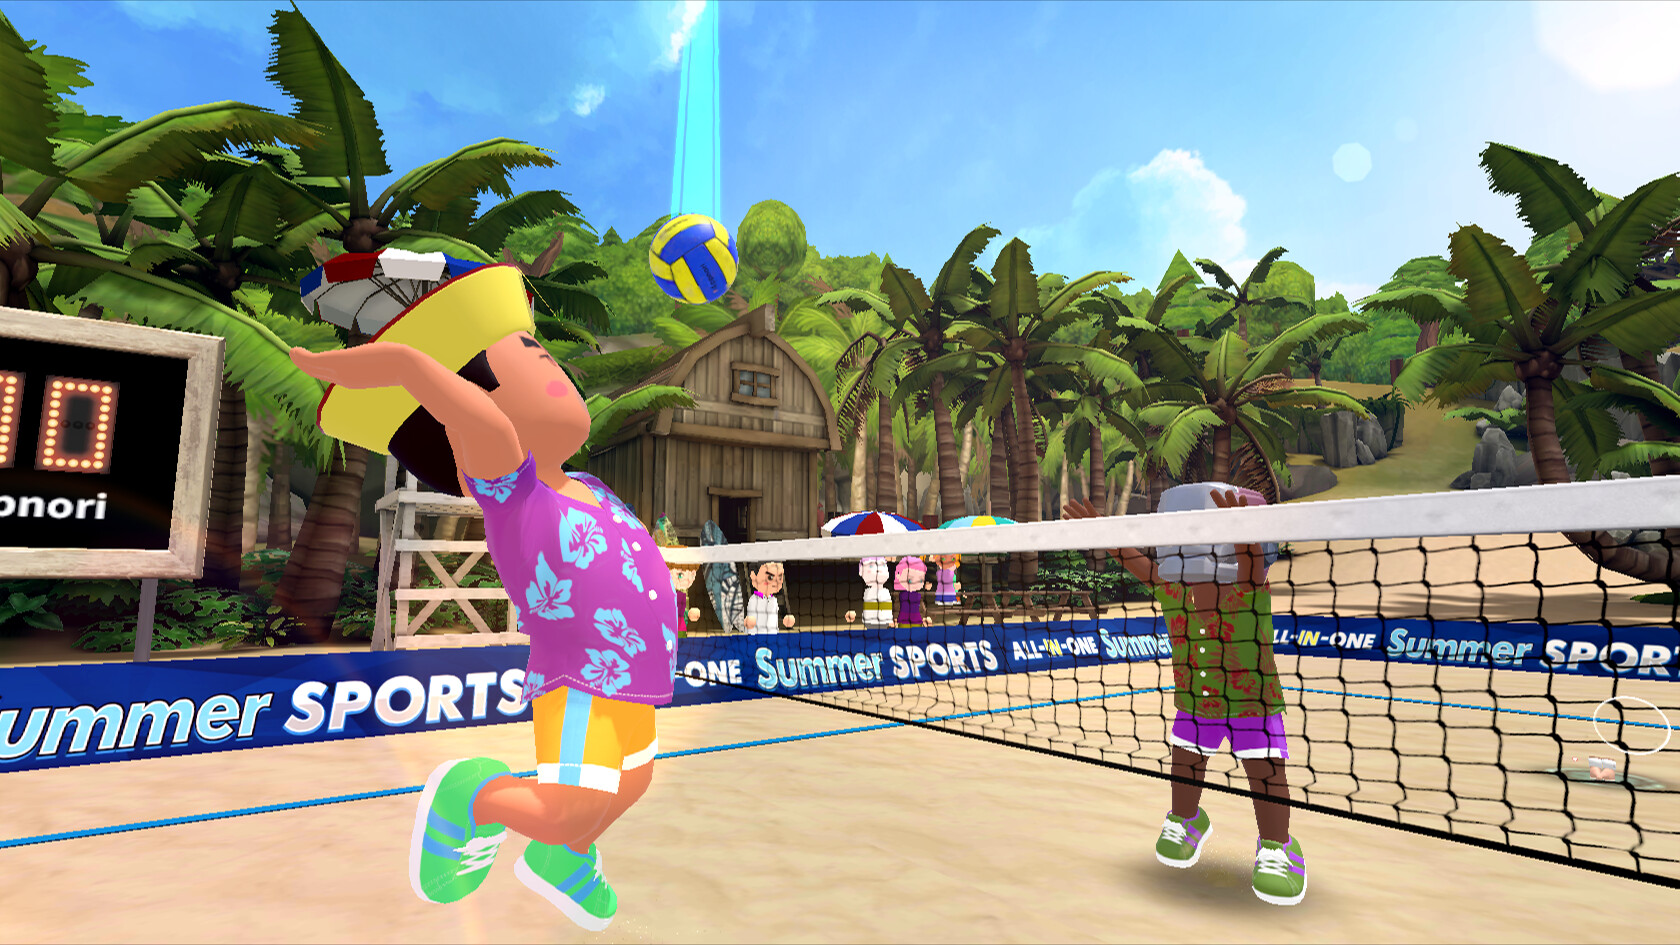 All-In-One Summer Sports VR Steam CD Key